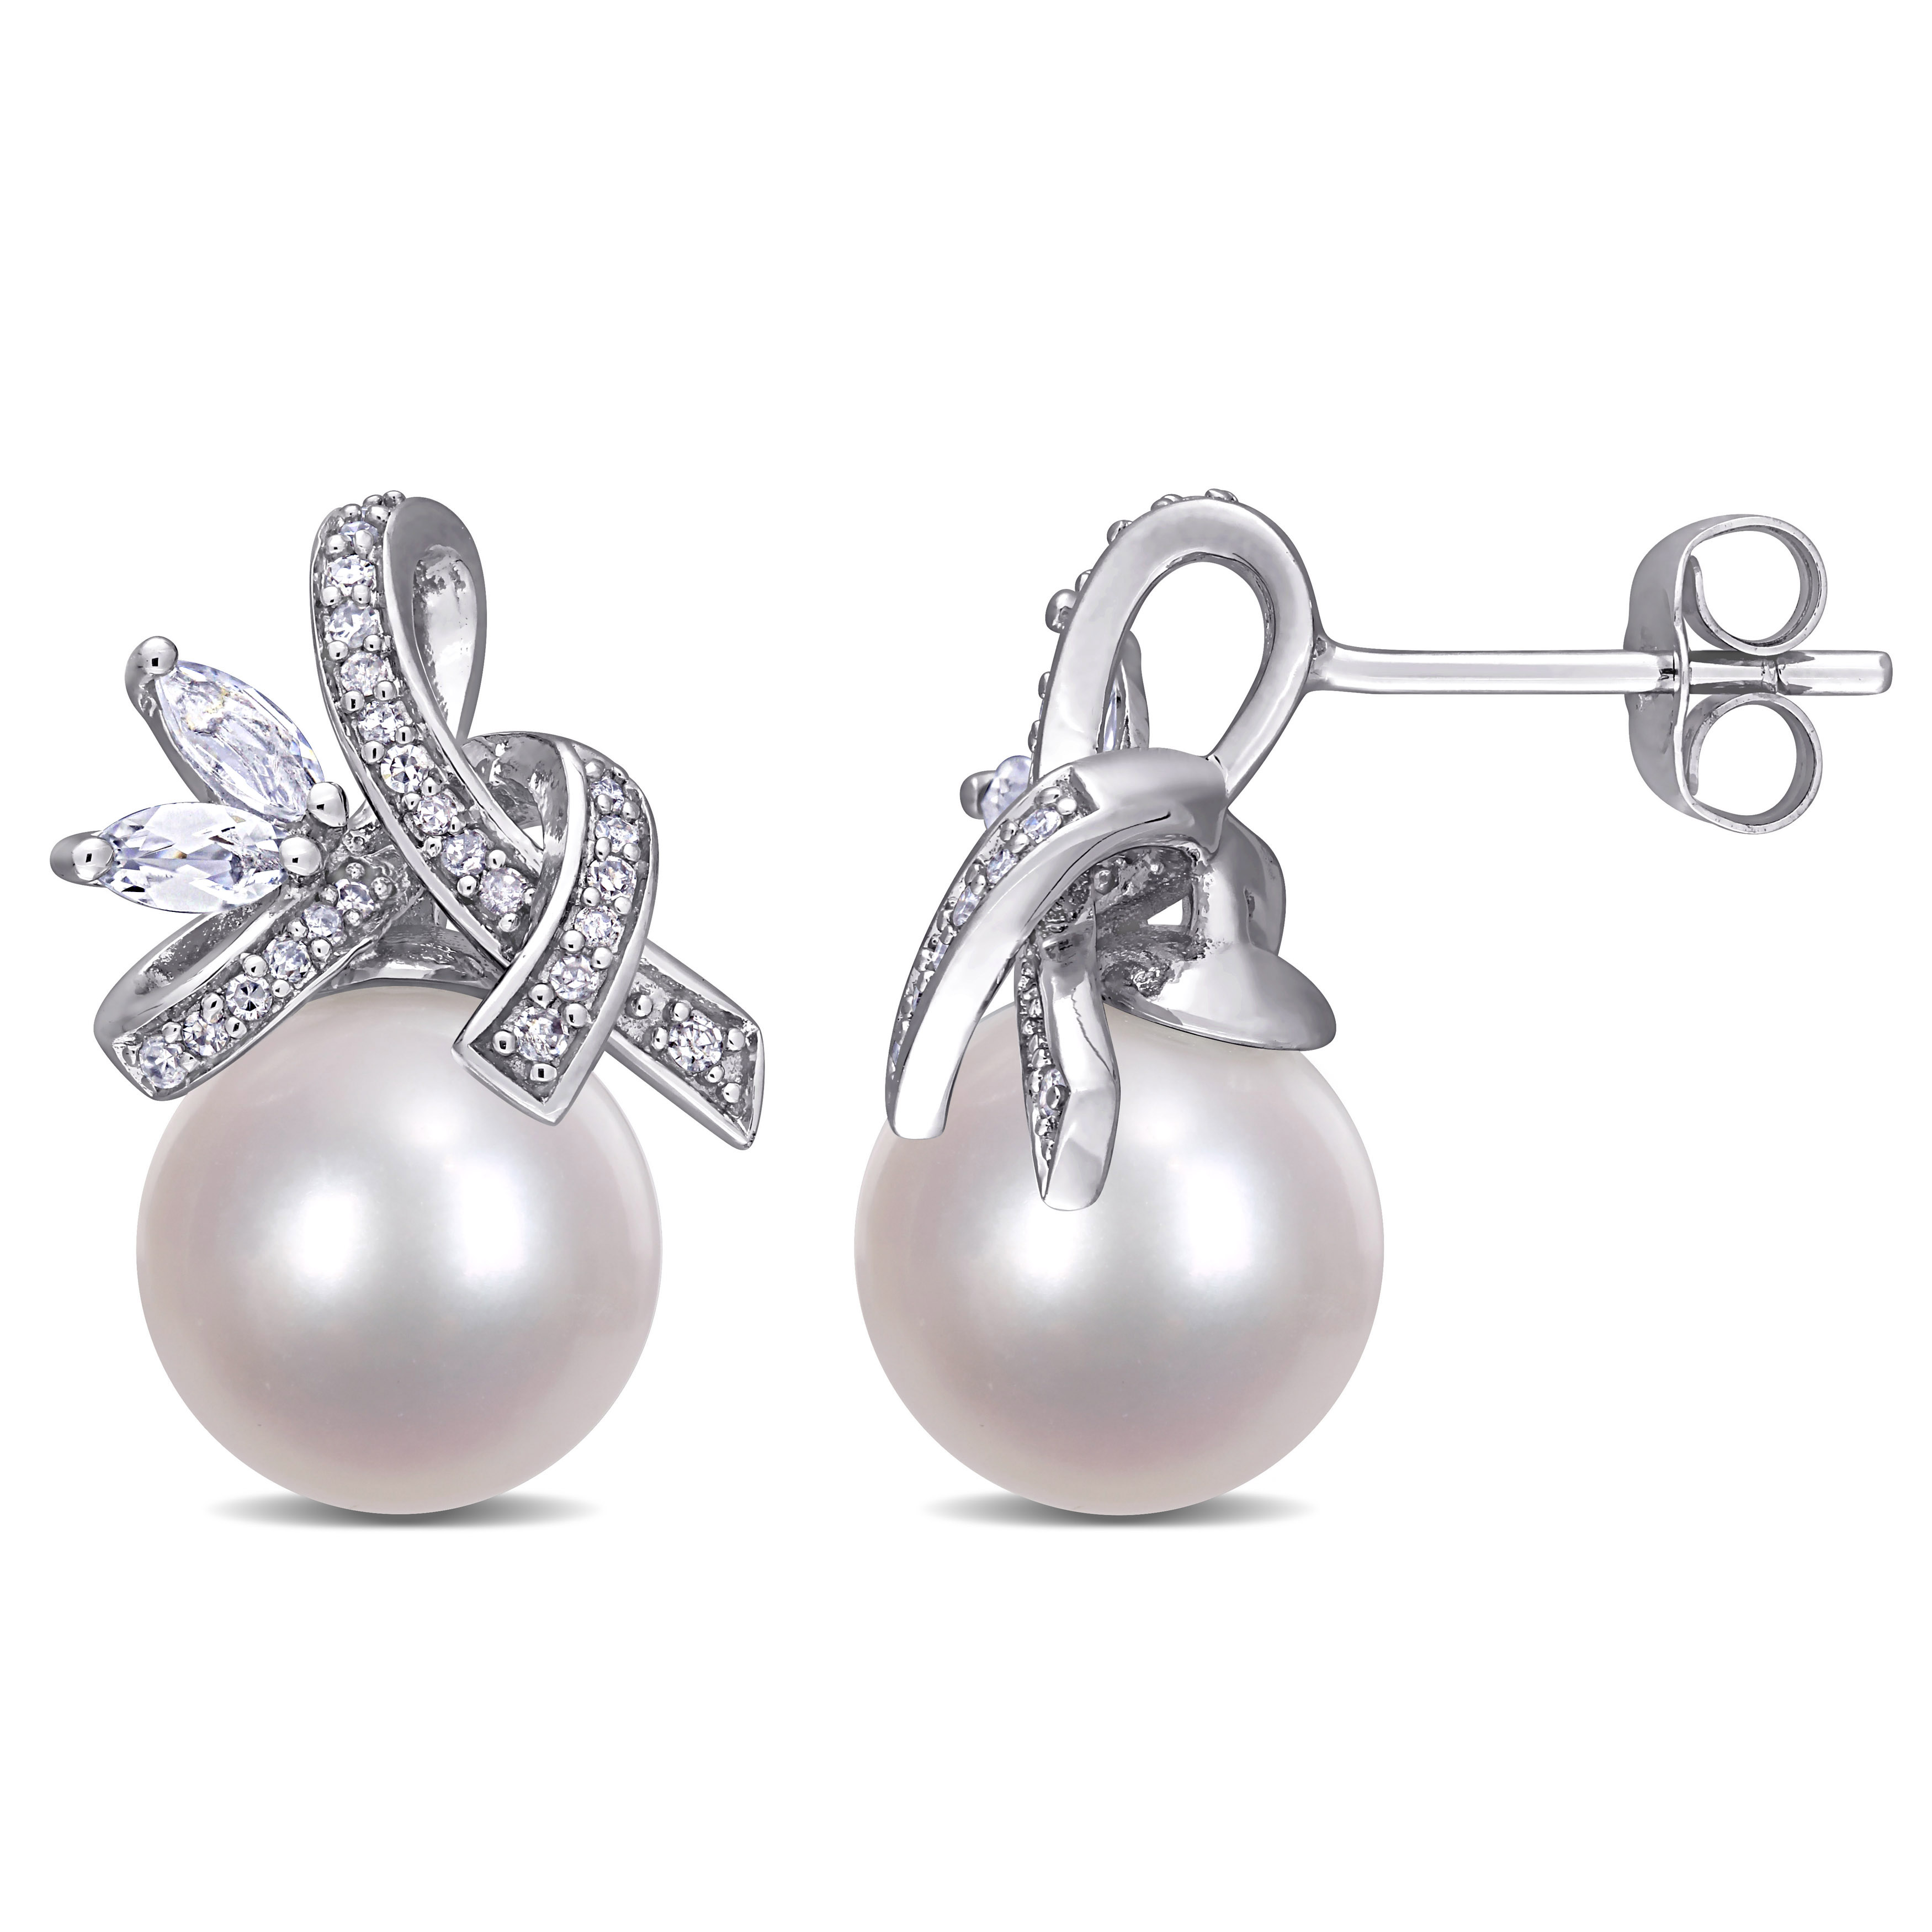 9.5 - 10 MM Freshwater Cultured Pearl and White Topaz and 1/6 CT TW Diamond Flower Stud Earrings in 10k White Gold